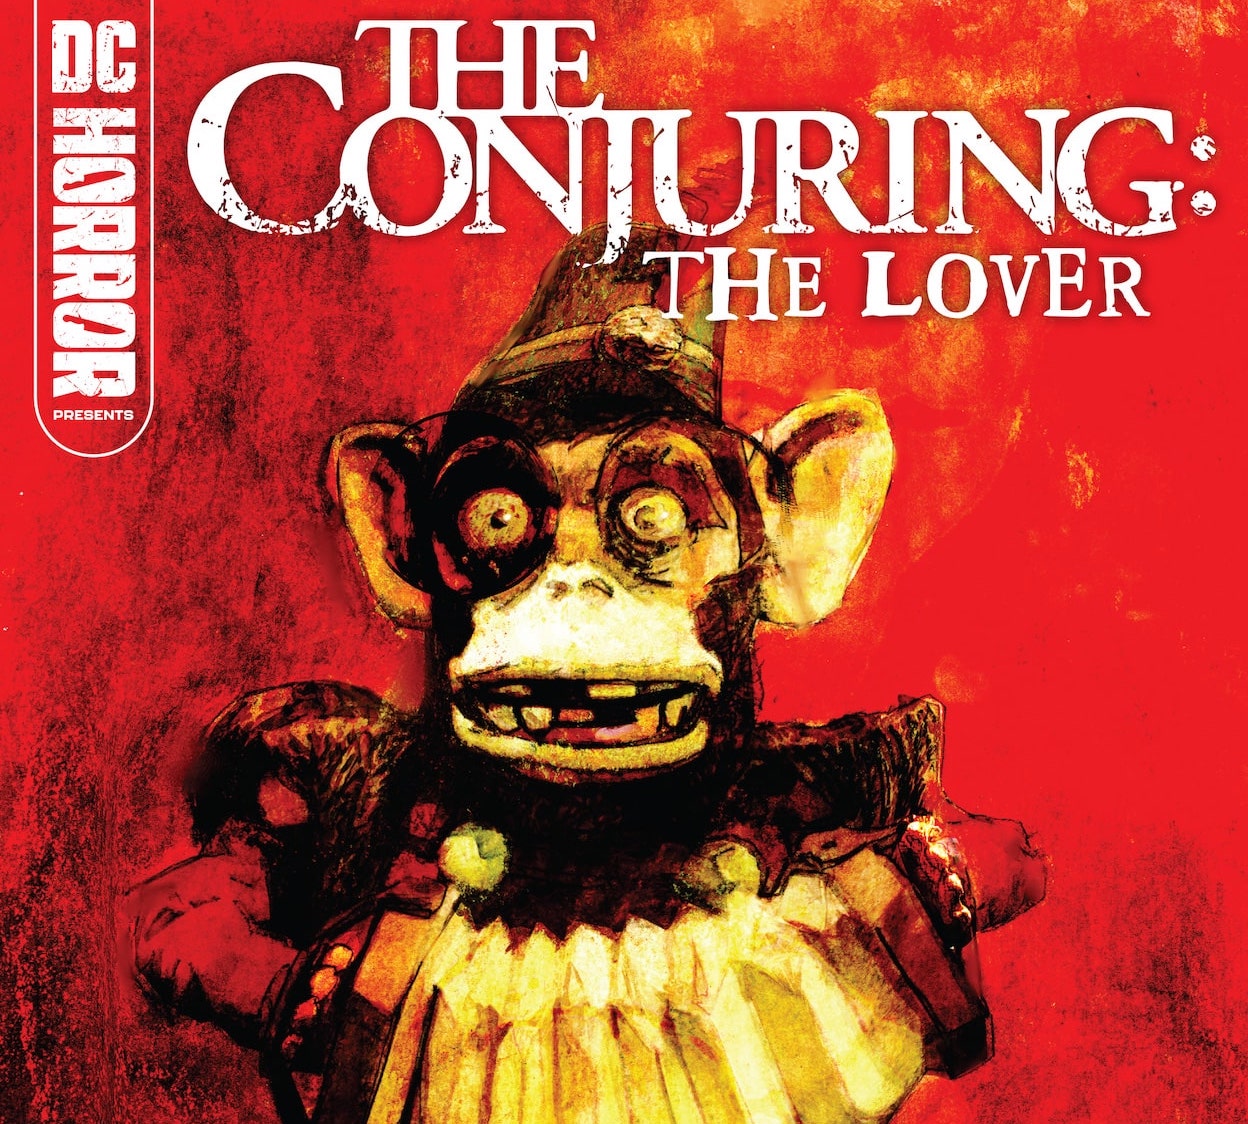 DC Preview: DC Horror Presents: The Conjuring: The Lover #3